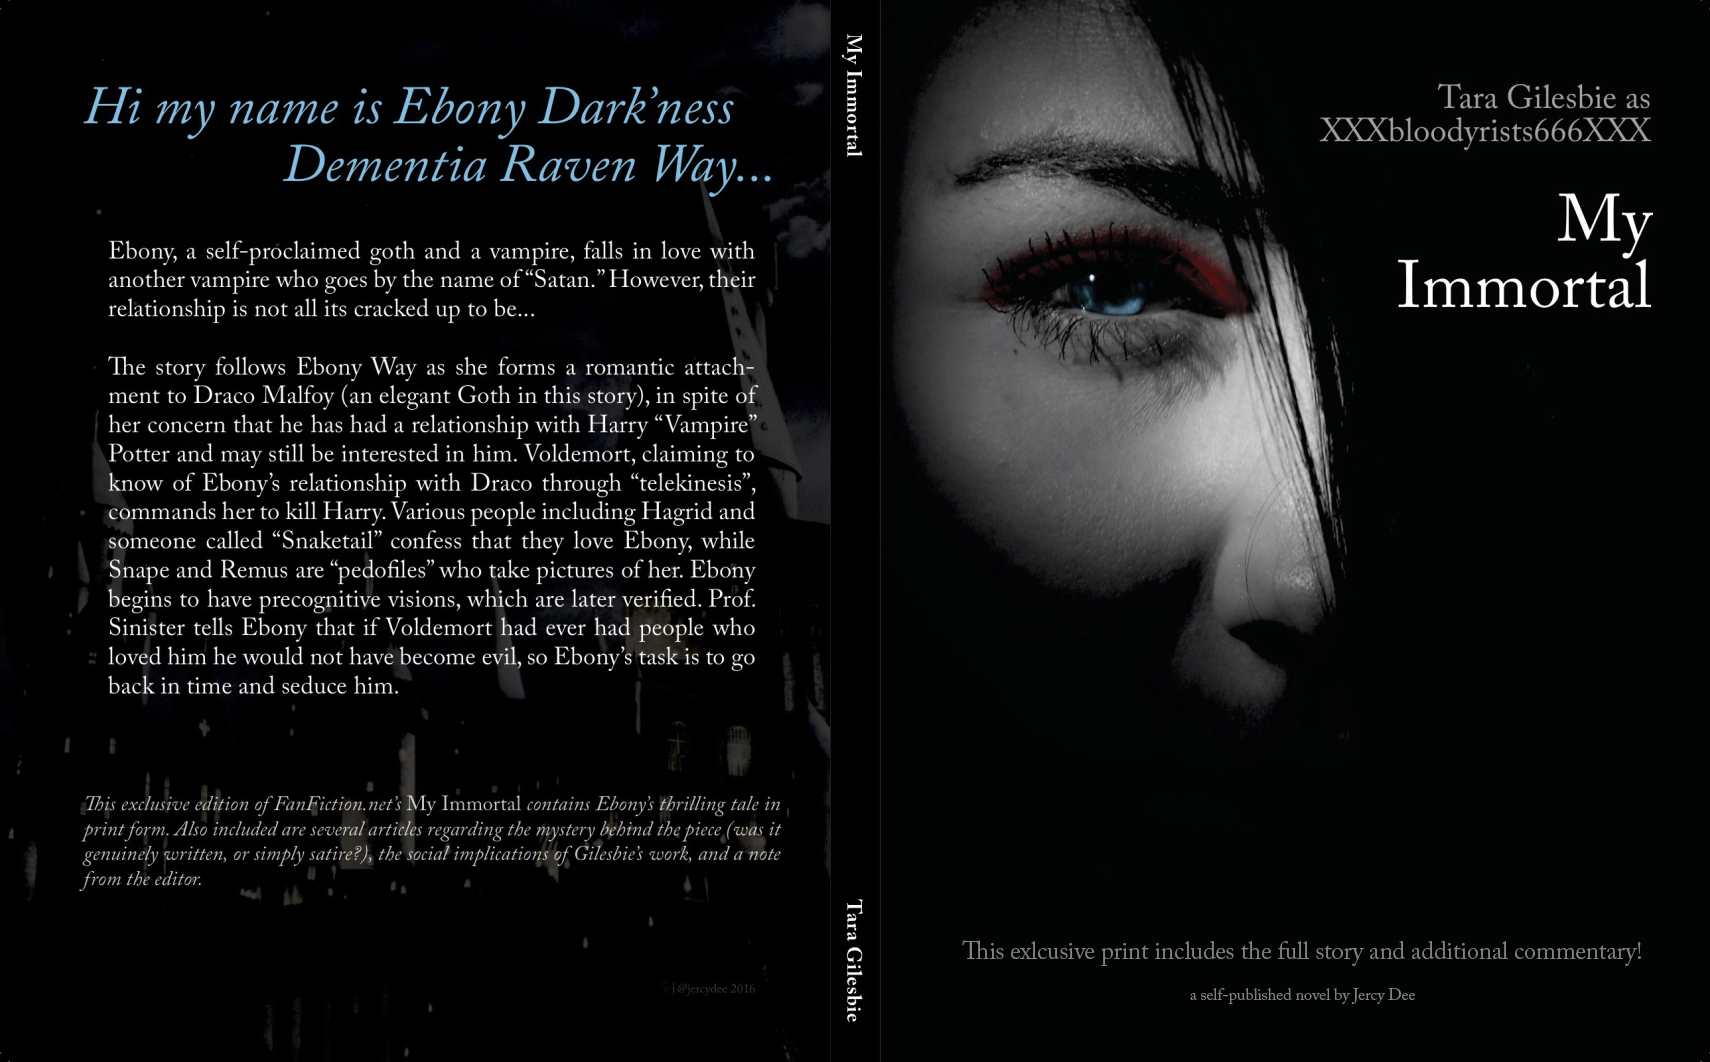 A digital version of the book's cover (front, back, and spine).